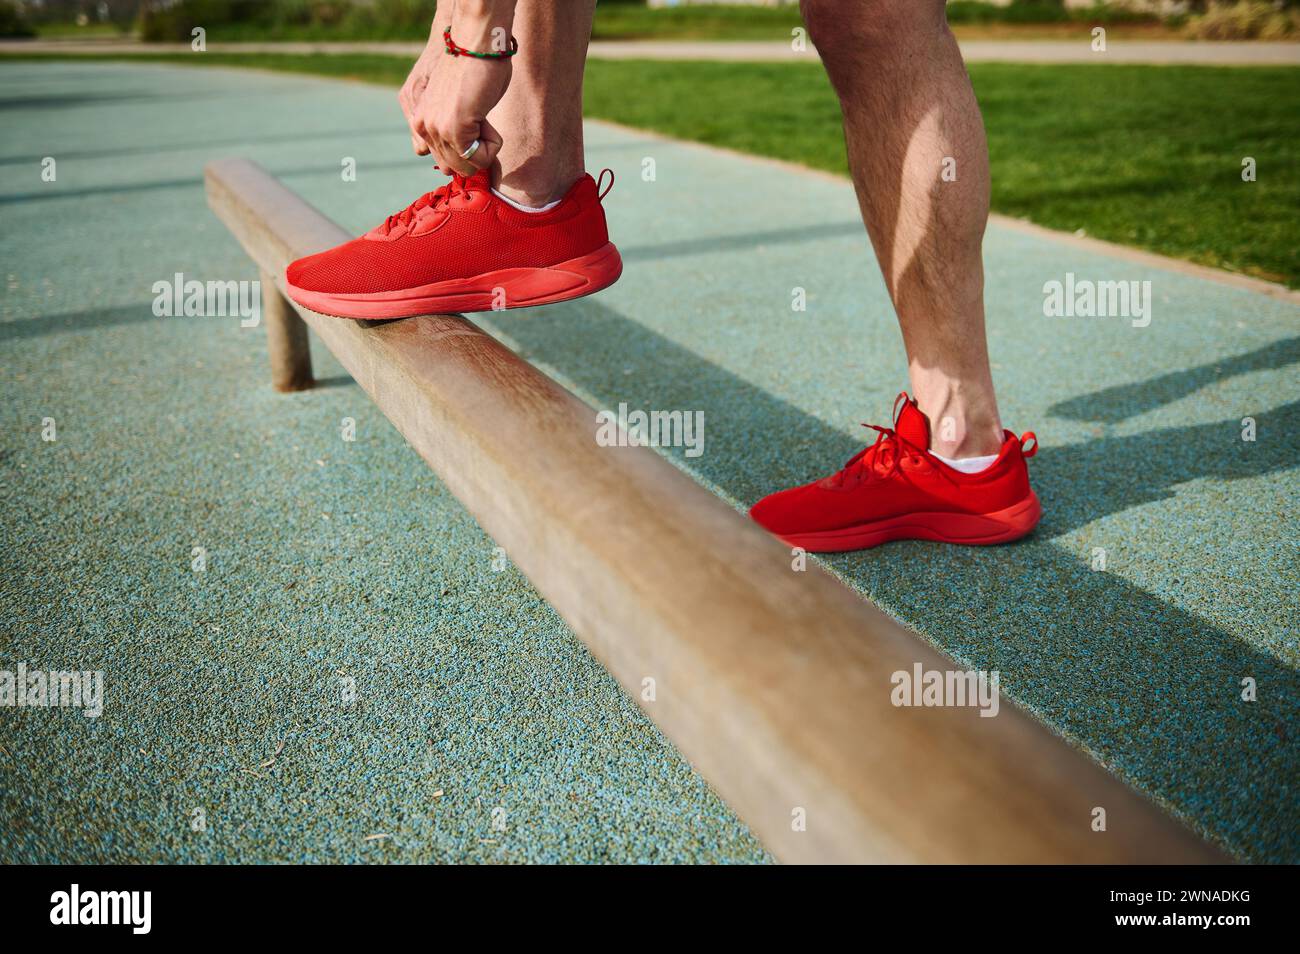 Closeup of a guy fixing his red sport shoes before training at park or running, jogging, sprinting. Footwear. Sports shoes. Active lifestyle Stock Photo